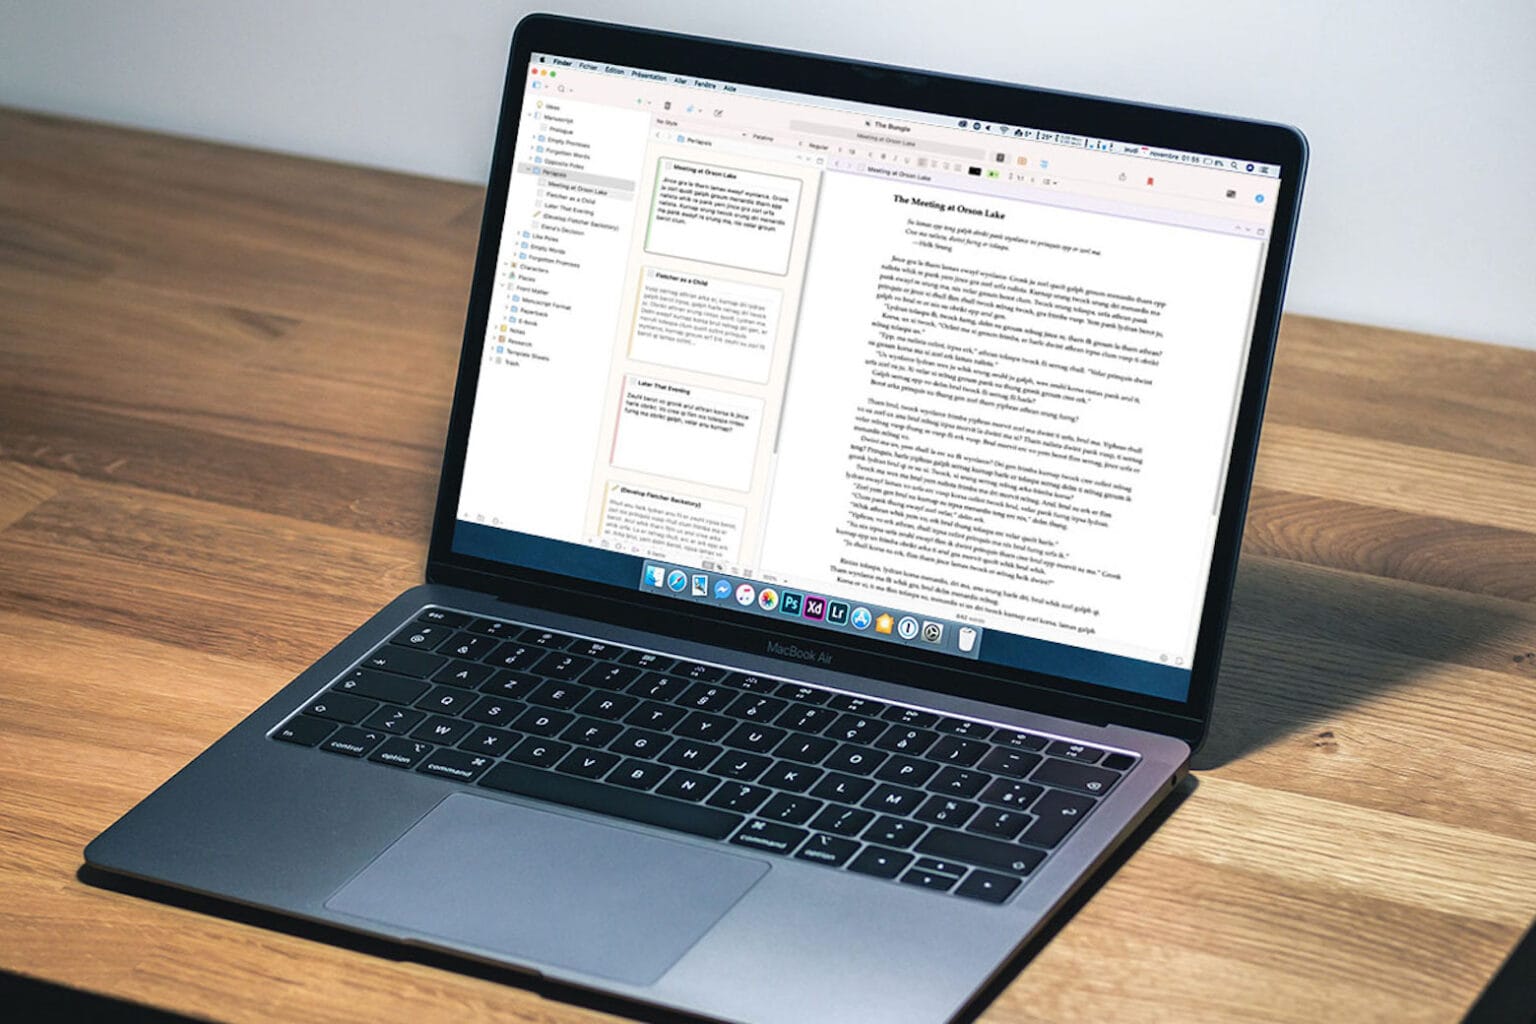 Save 50% on this award-winning app that makes writing much easier.